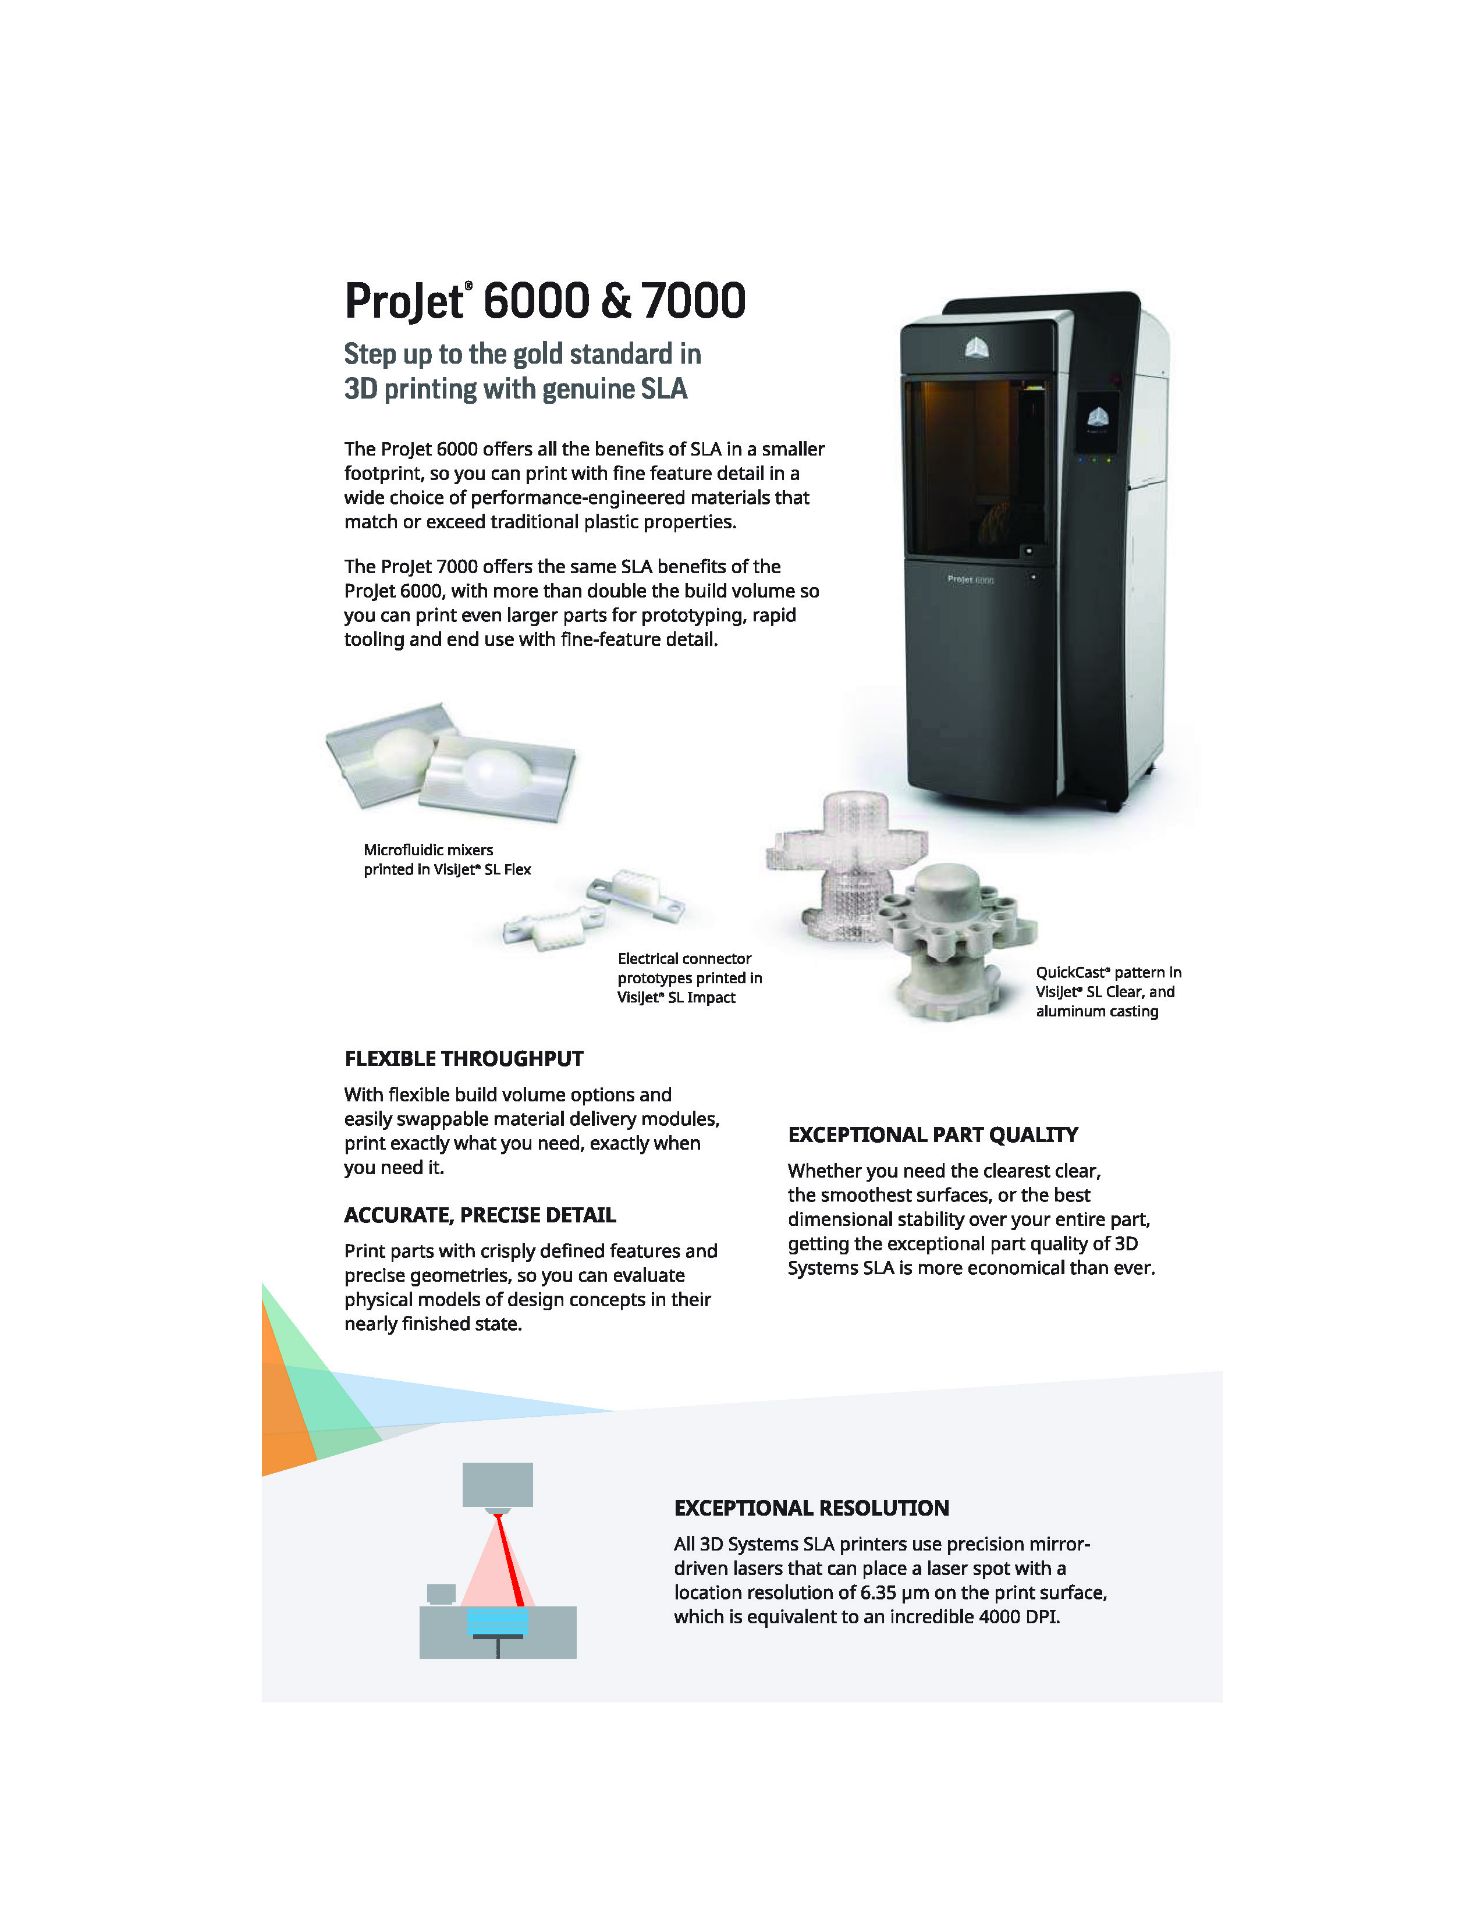 3D SYSTEMS ProJet 7000 HD Stereolithography 3D Printer, Used For Demo Only - Image 14 of 17